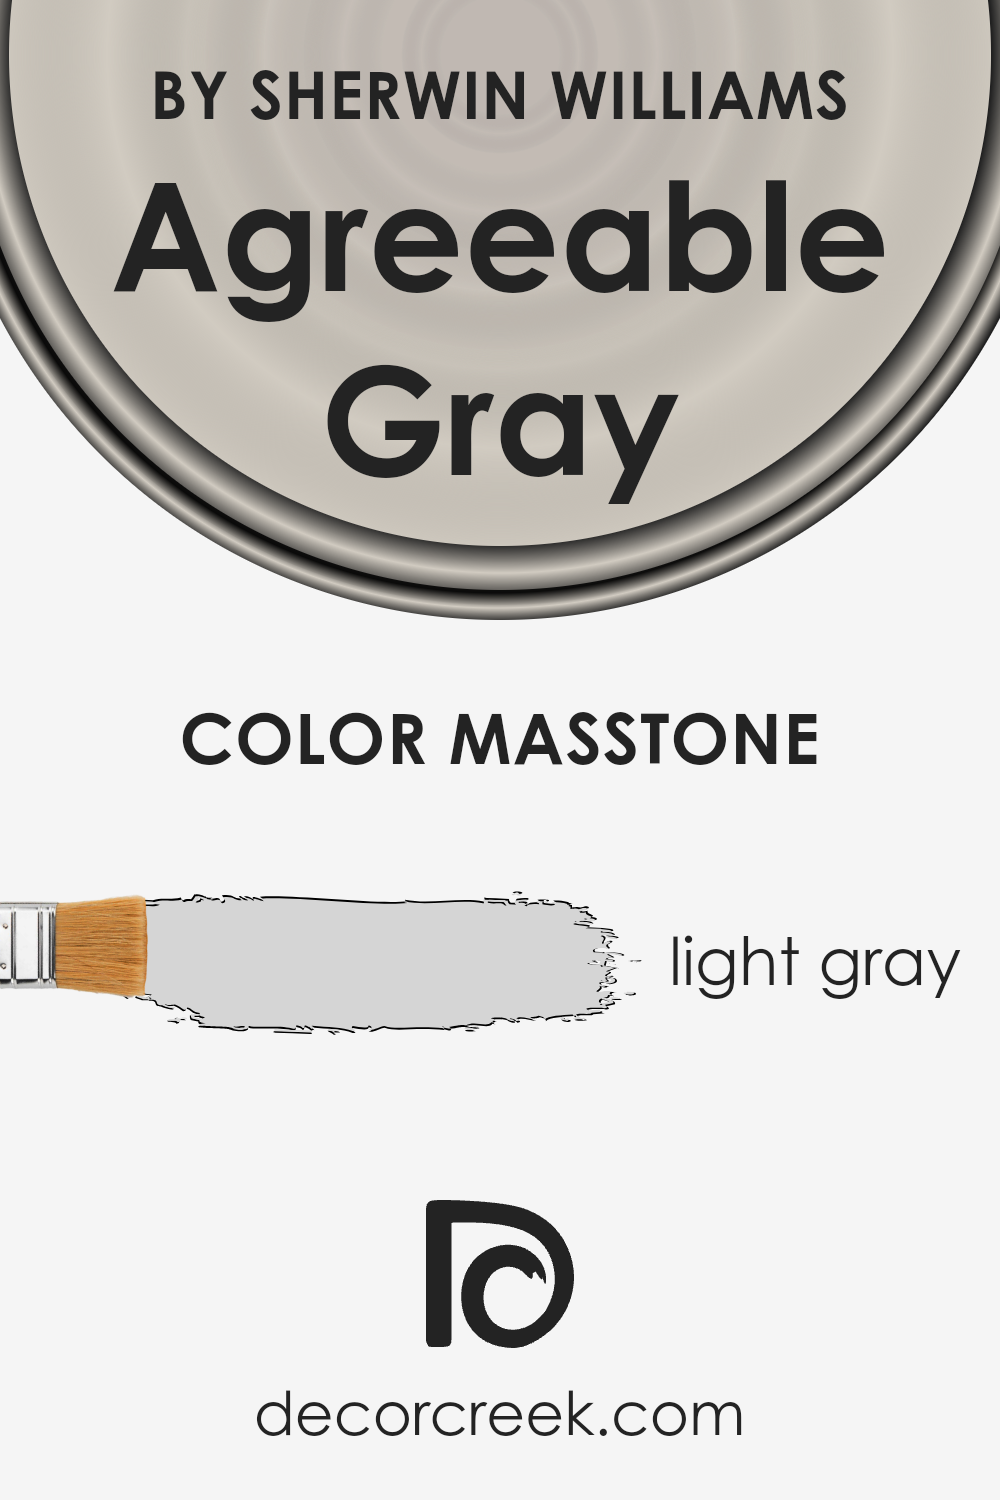 what_is_the_masstone_of_agreeable_gray_sw_7029